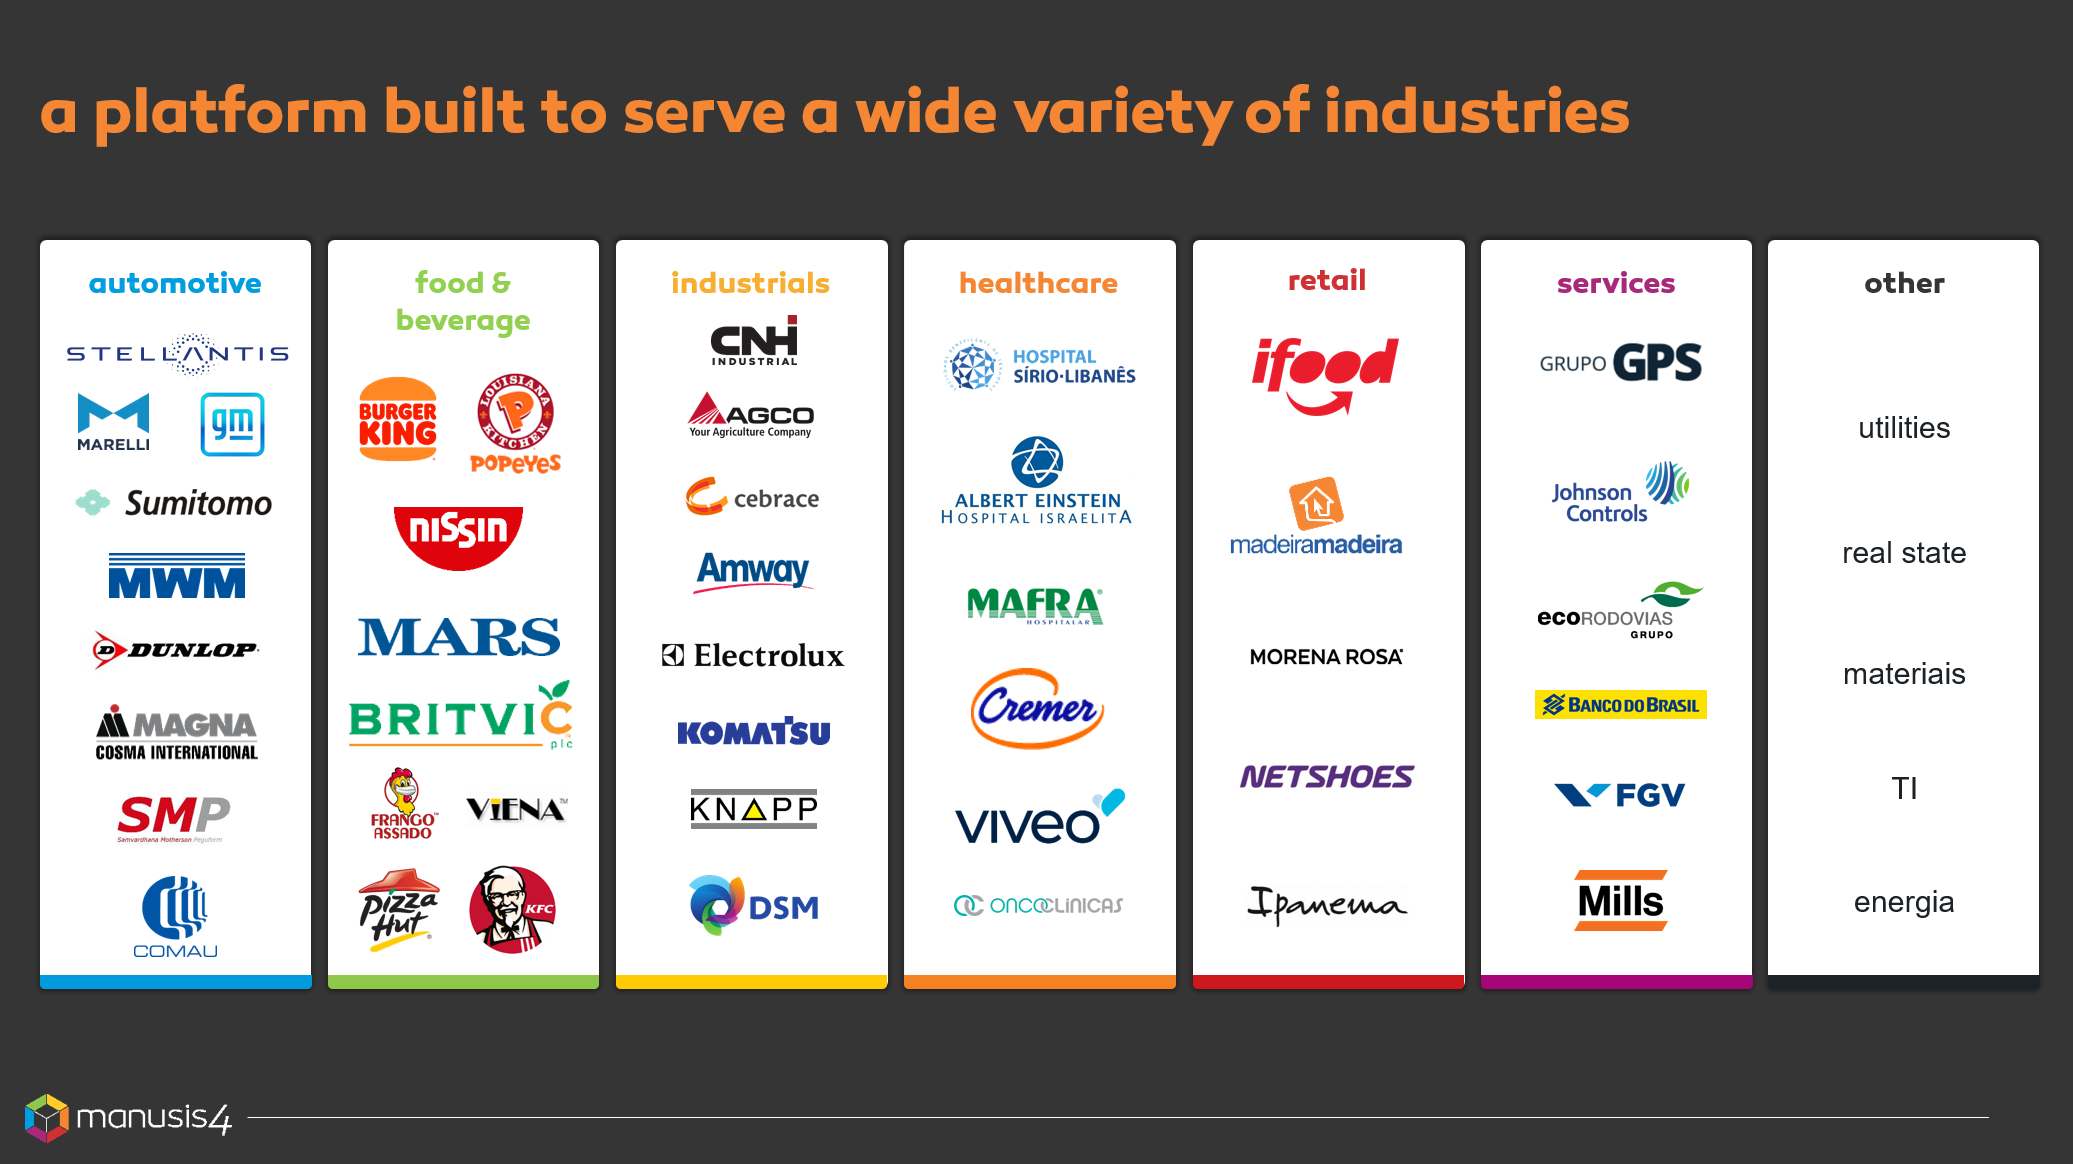 A platform built to serve a wide variety of industries